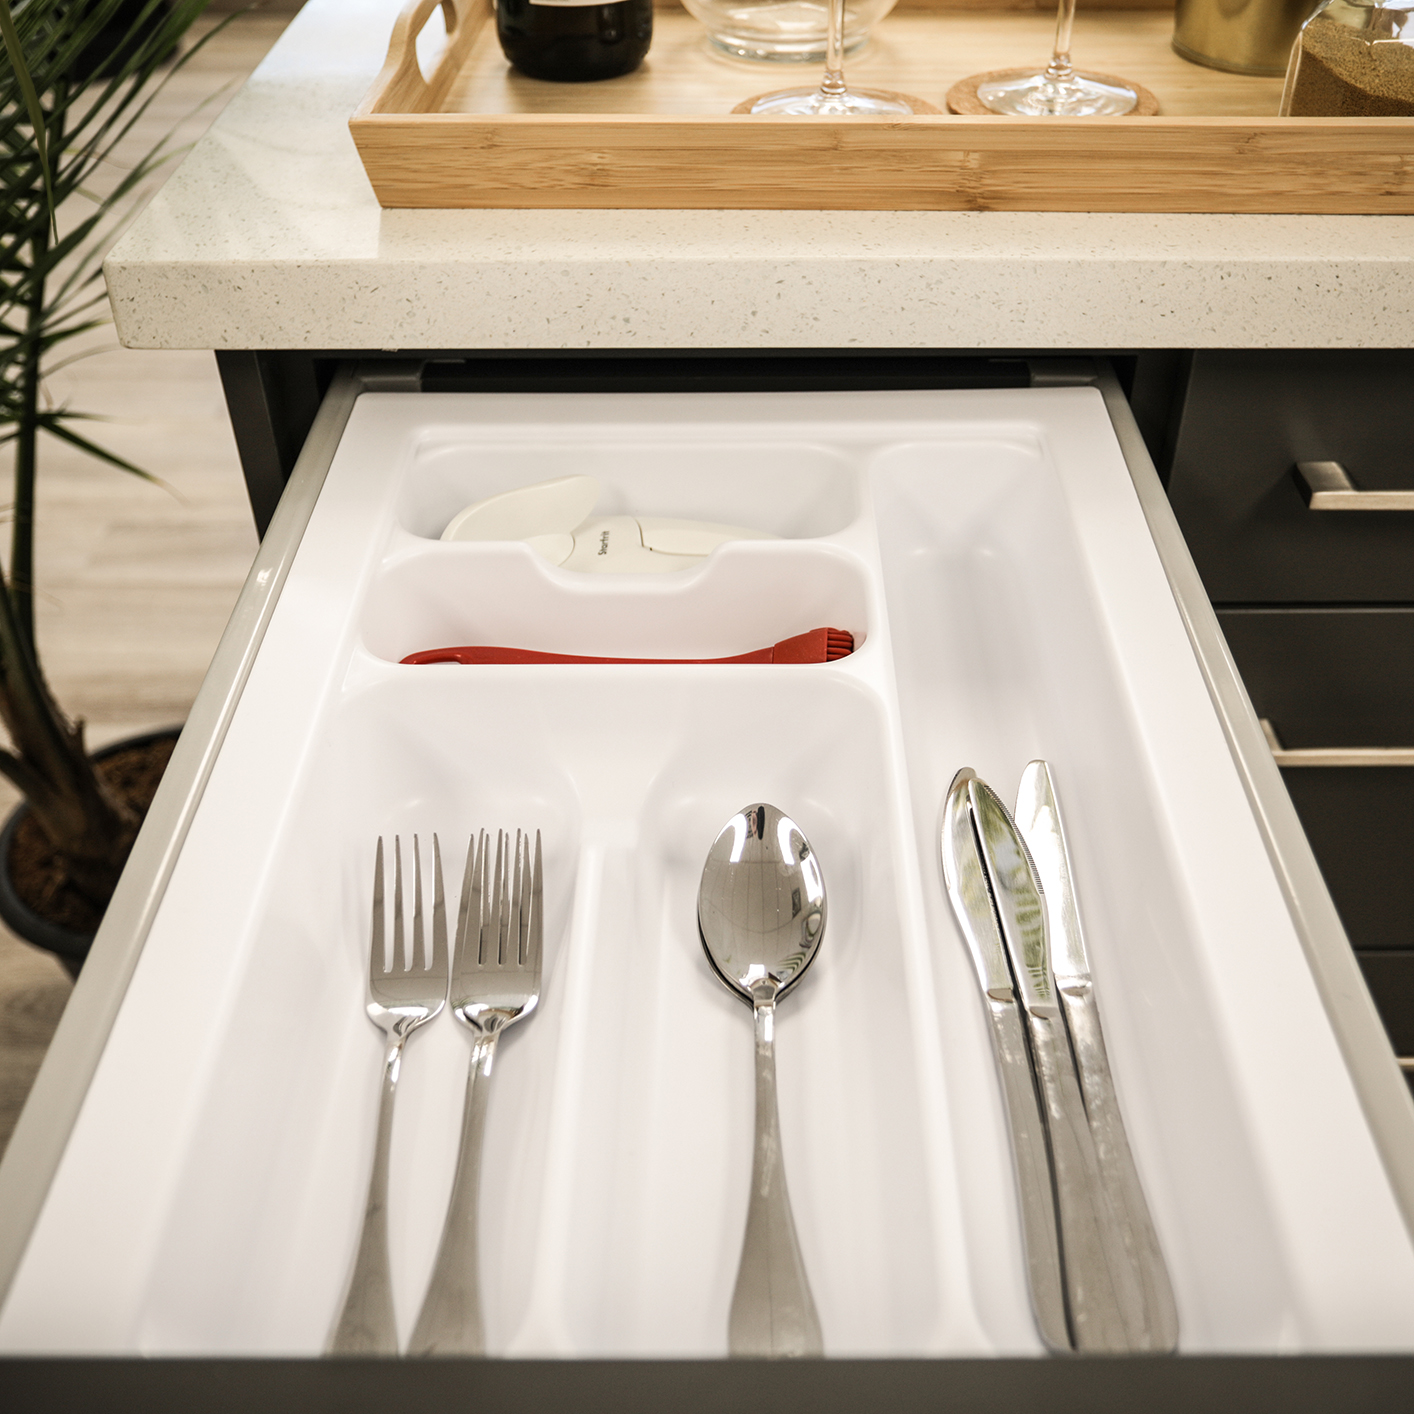 Cutlery Trays for 20 and 22 inch deep drawers.